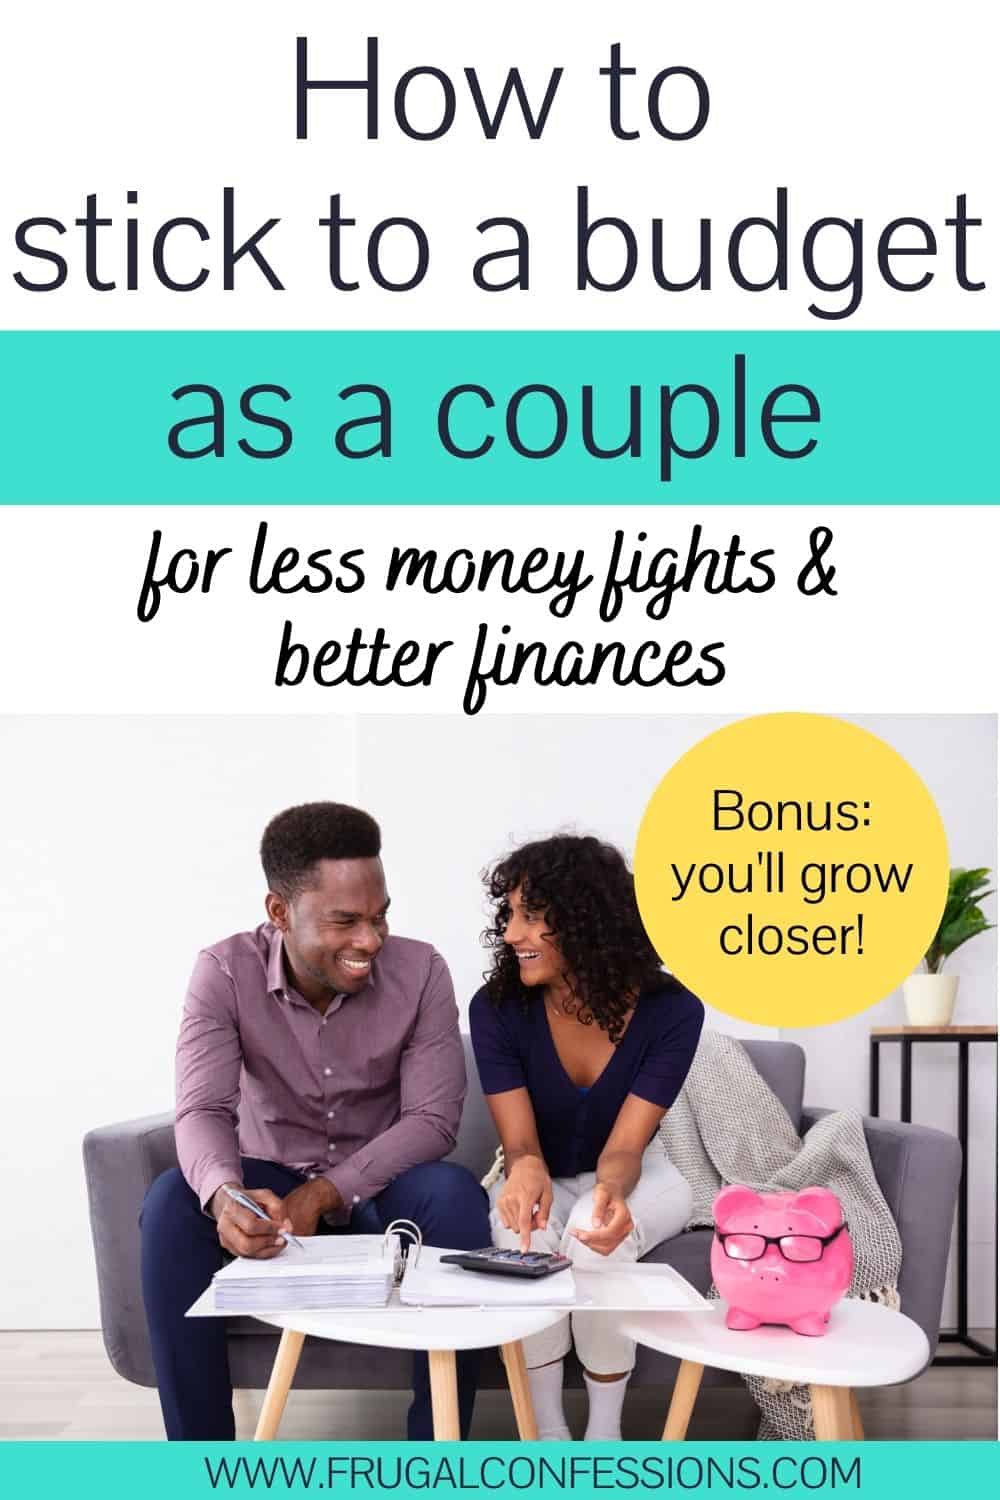 couple on couch smiling, working on budget together, text overlay "how to stick to a budget as a couple for less money fights"